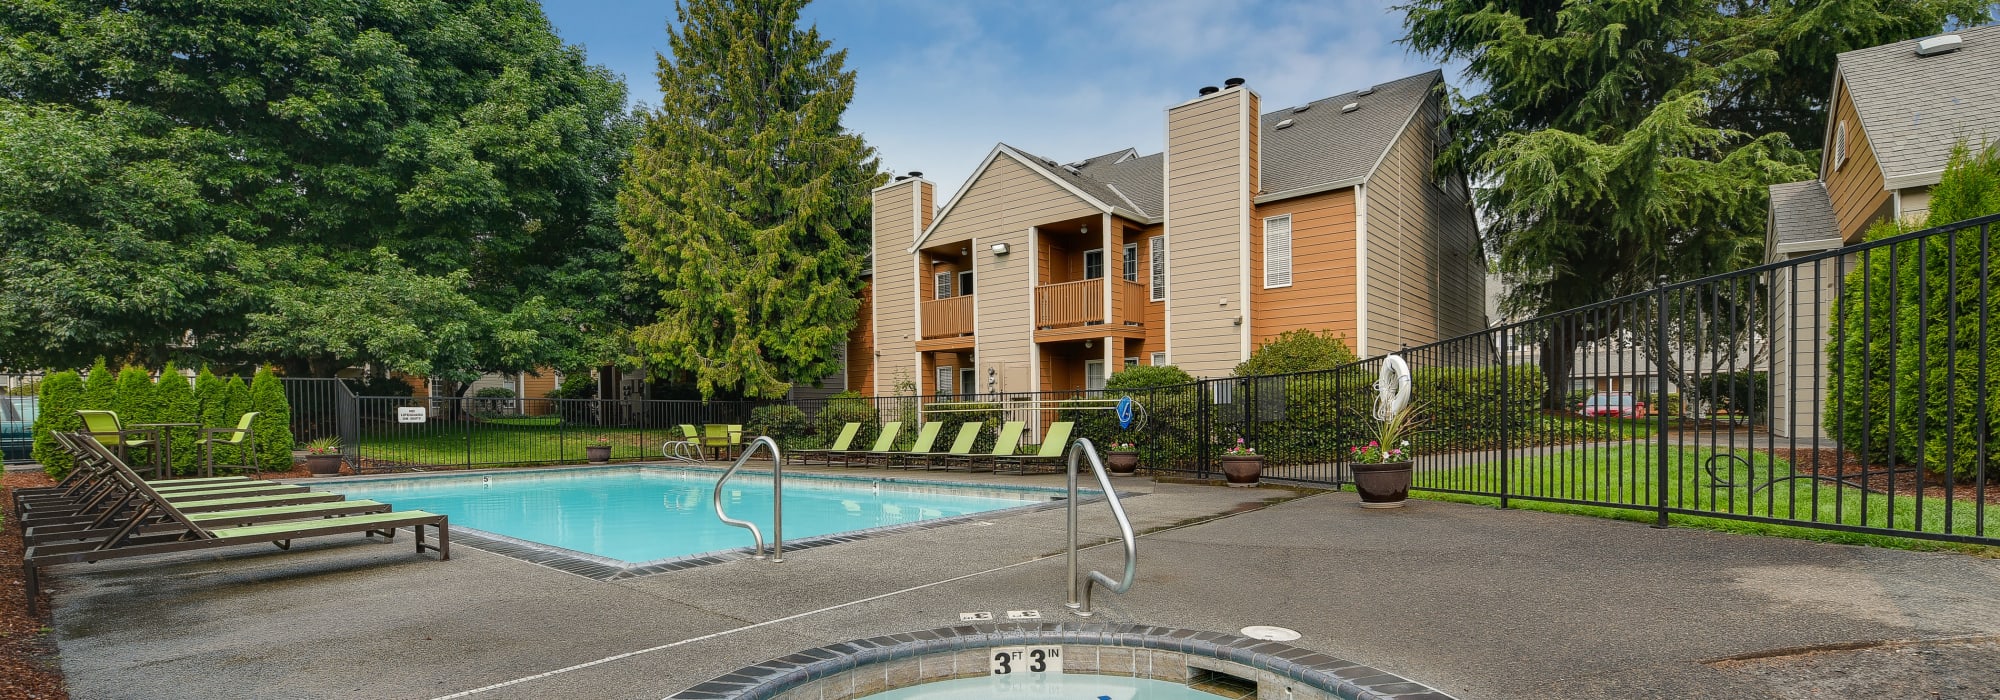 Floor plans at Carriage House Apartments in Vancouver, Washington